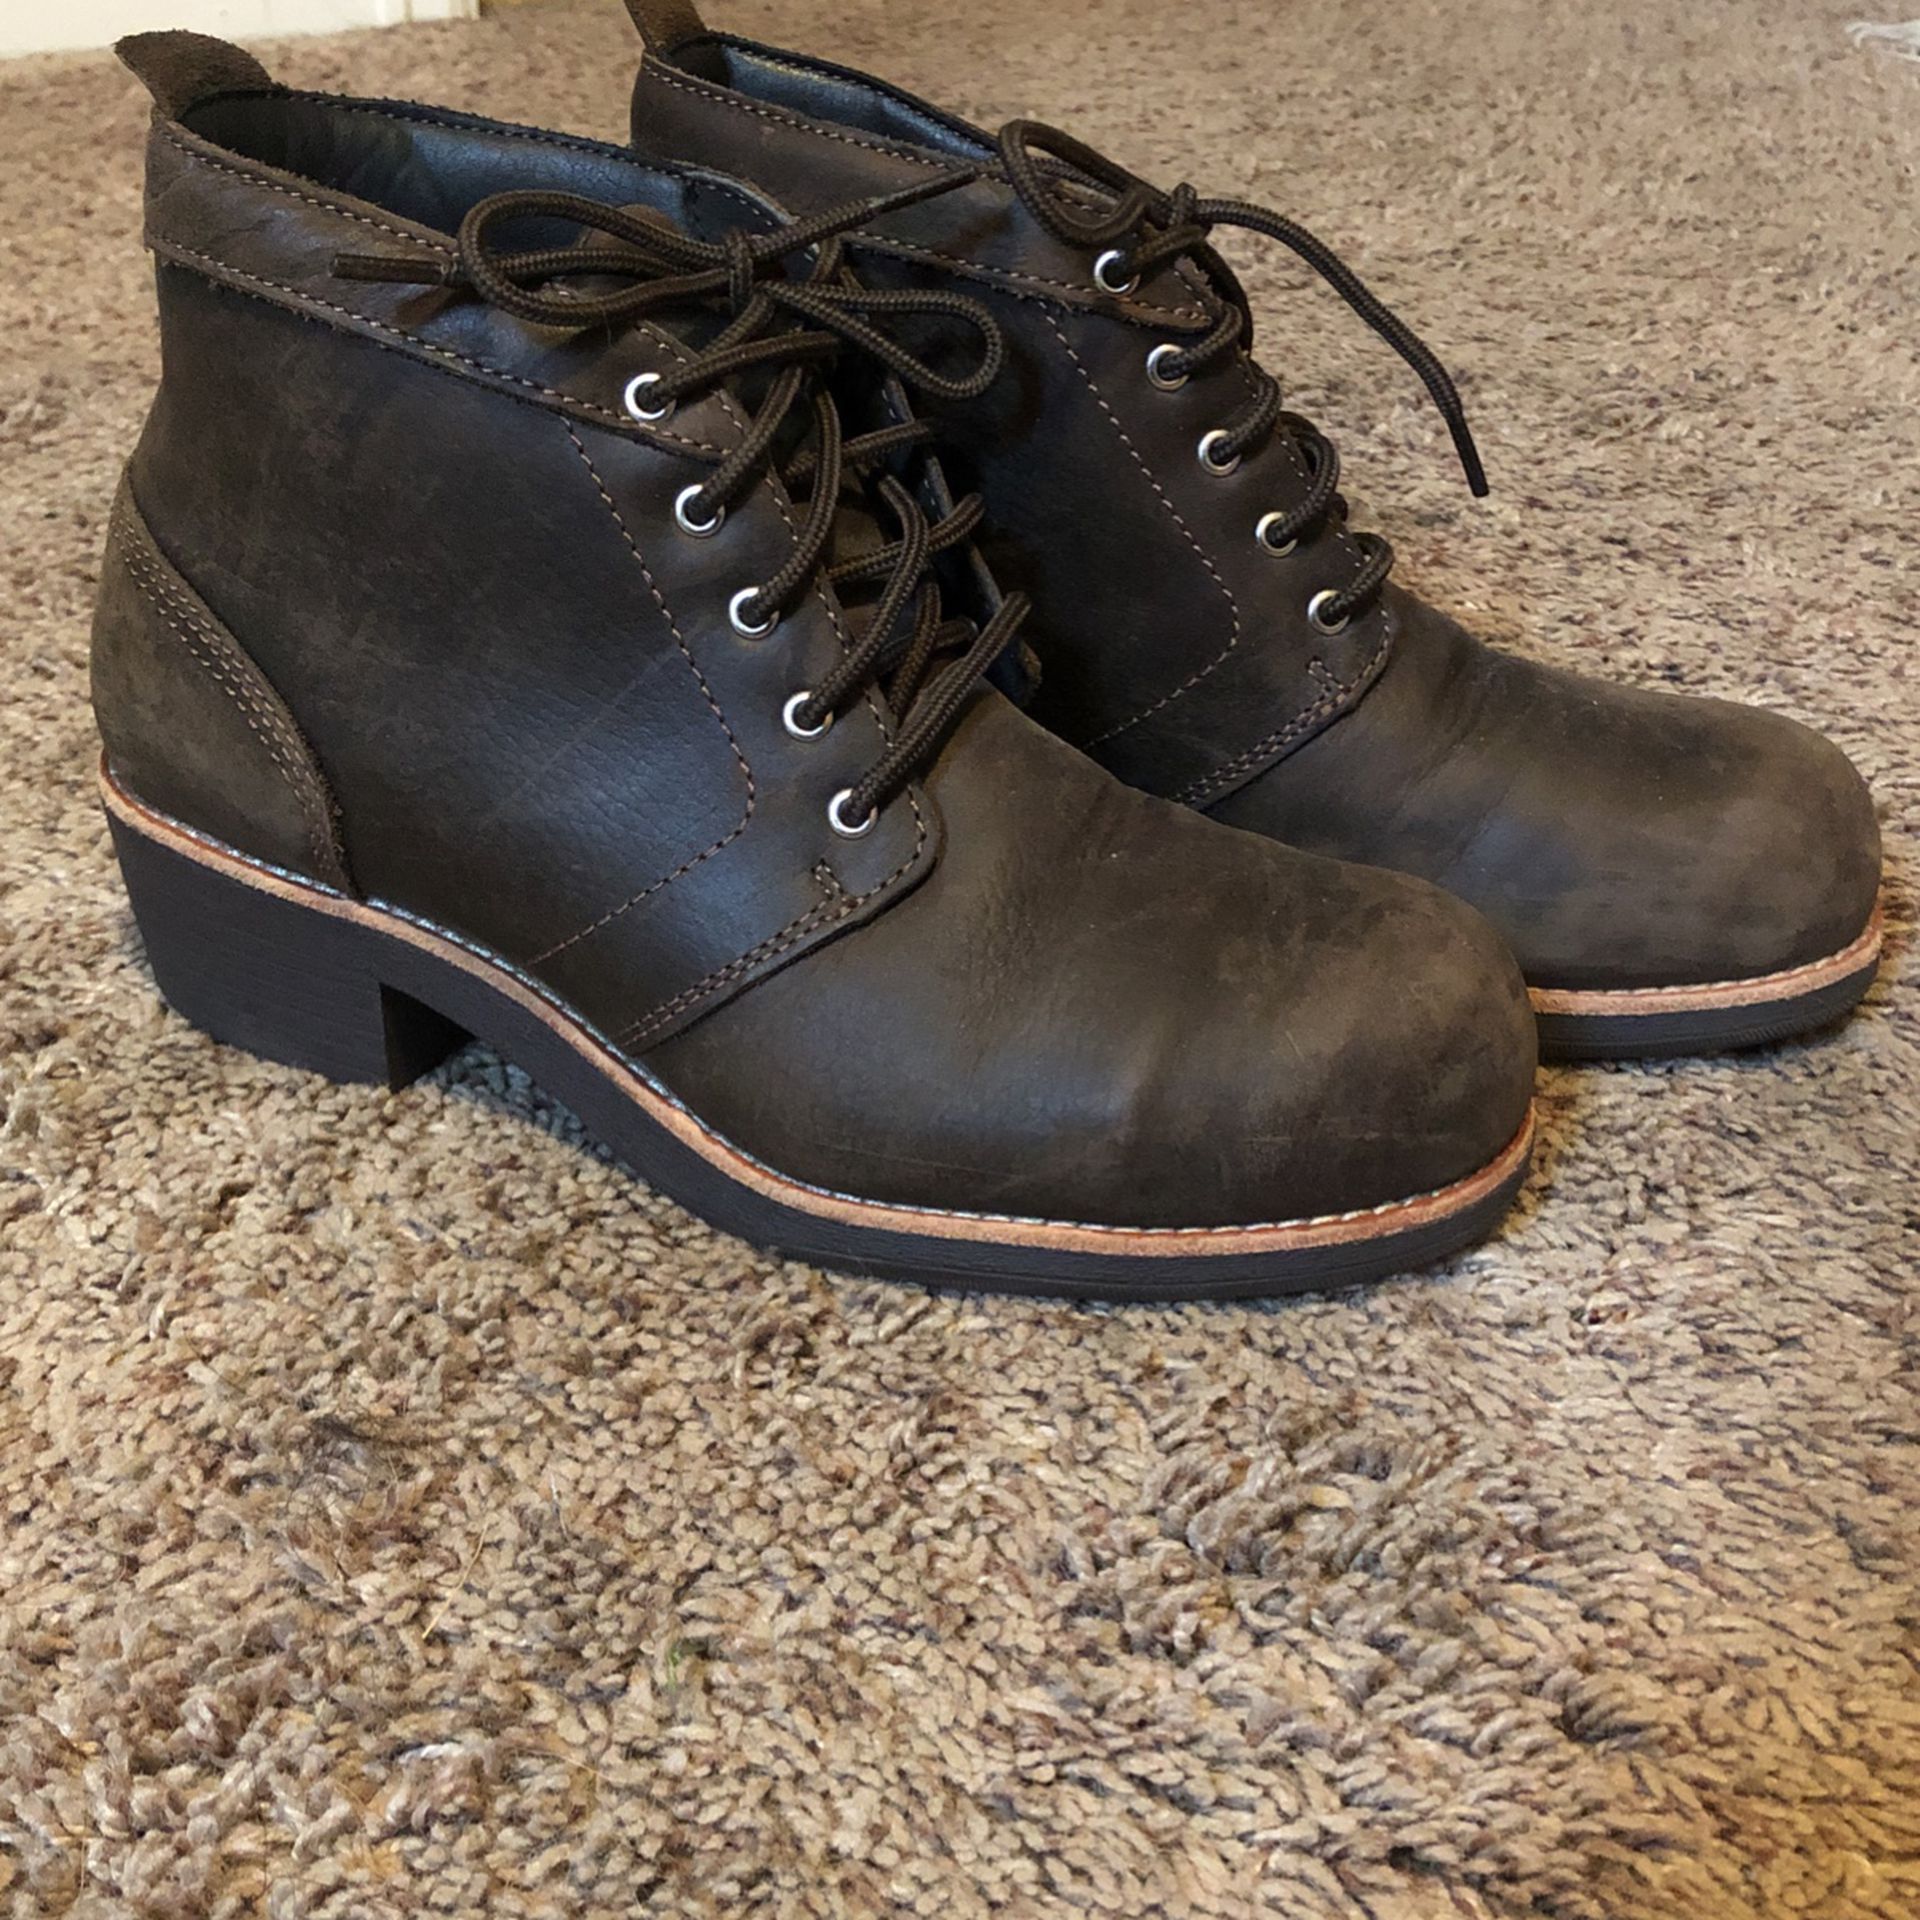 Women’s Steal Toe Boots (From Red wing)